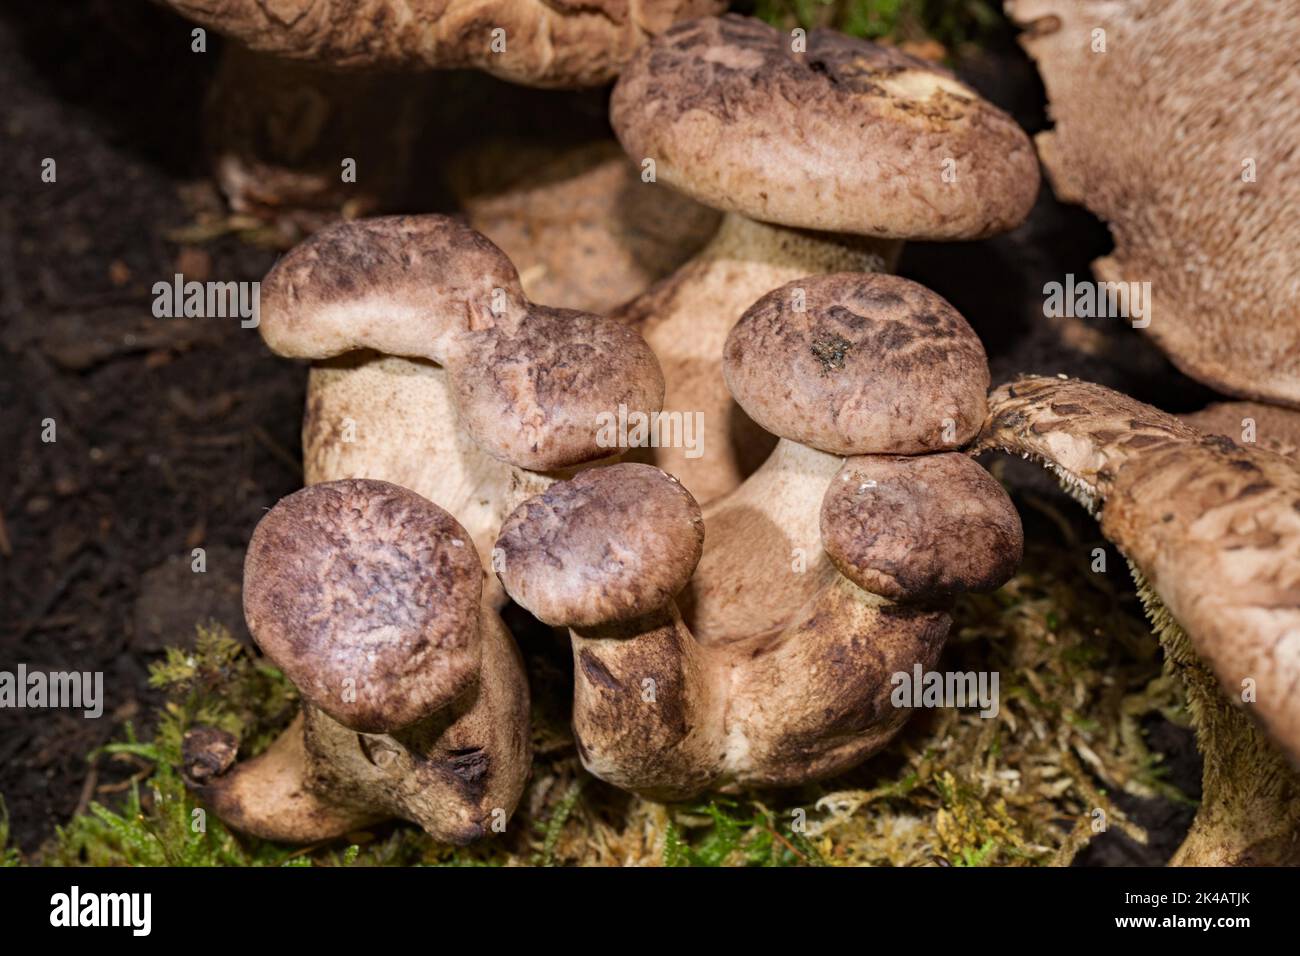 Hawk mushroom some fruiting bodies with grey-brown stems and caps Stock Photo